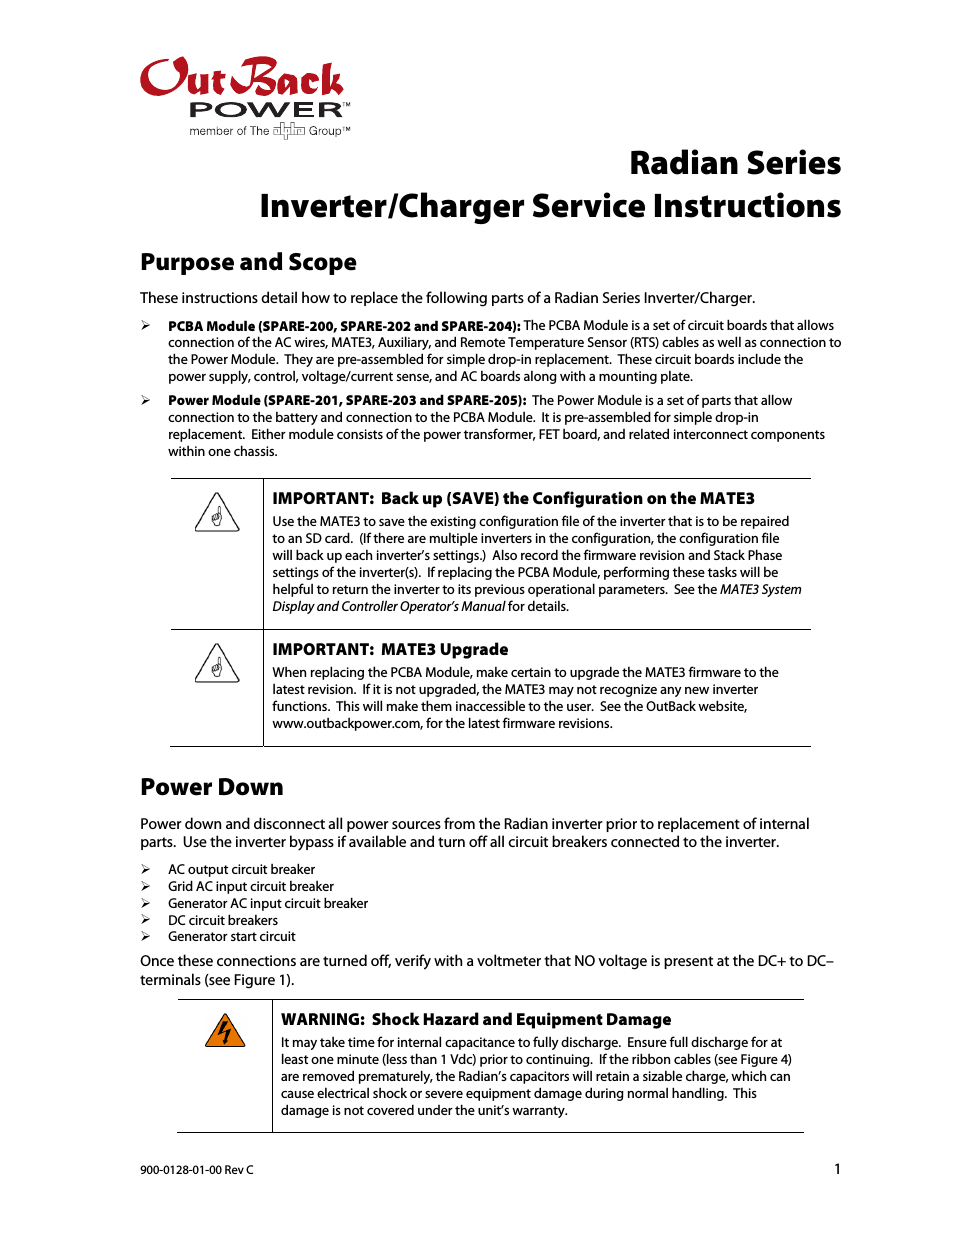 Radian Series Inverter/Charger Service Instructions